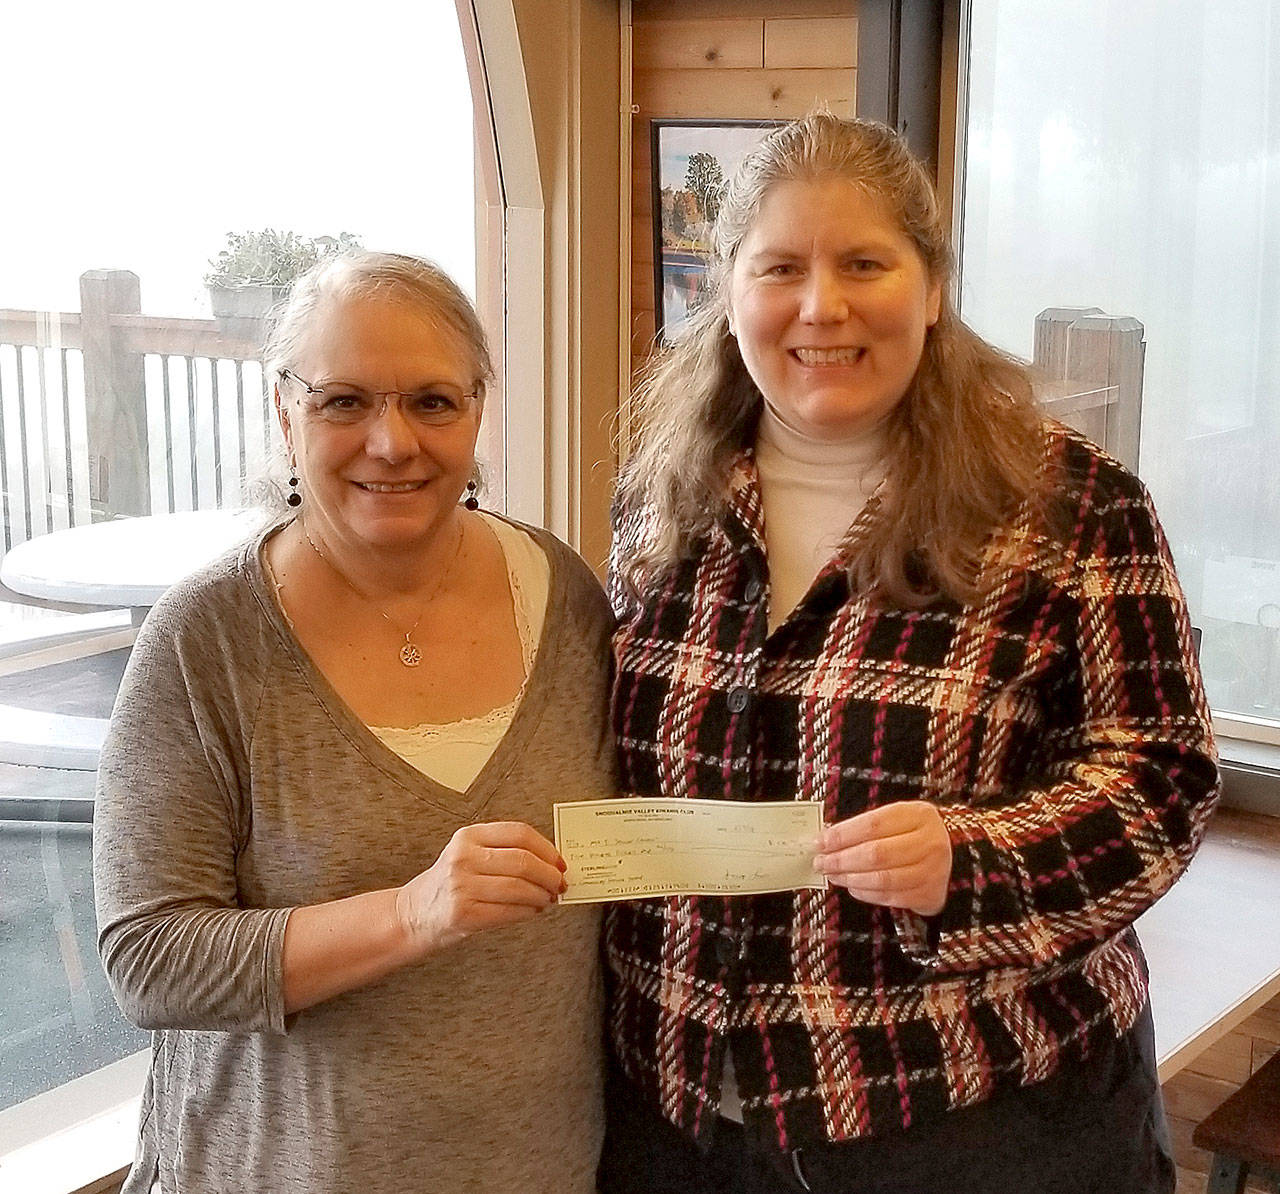 Kiwanis President Marie Jackson presented Mt. Si Senior Center Executive Director Susan Kingsbury-Comeau with a $500 check, the first award in the Kiwanis’ new community service grant program, Thursday, Feb. 15. (Courtesy Photo)